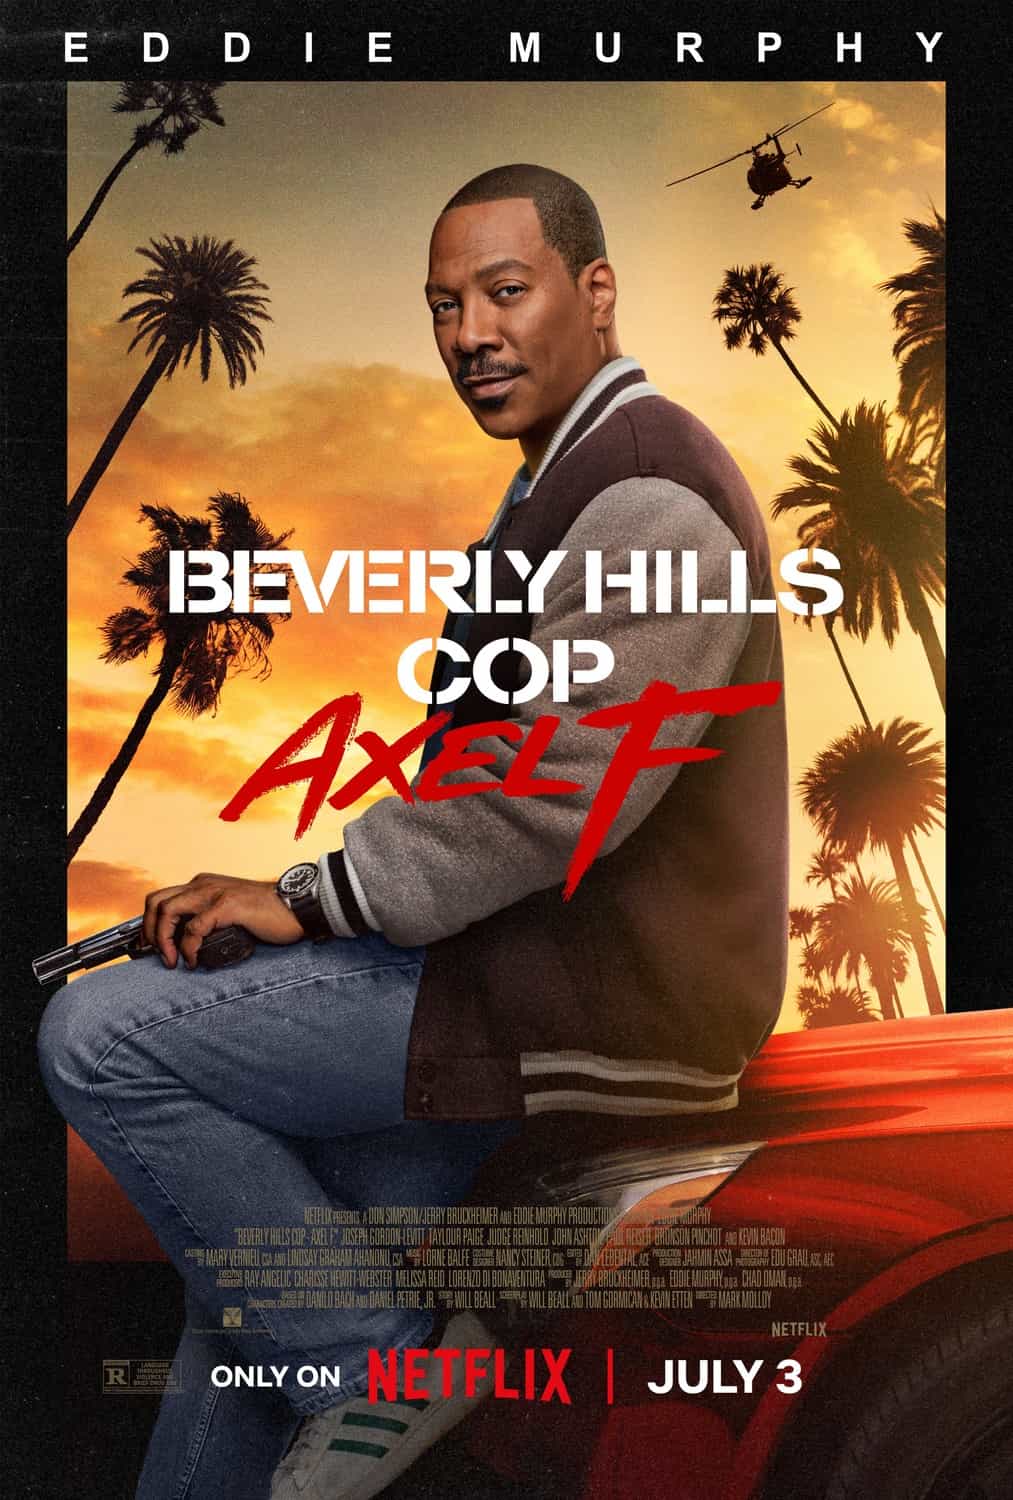 Check out the new trailer and poster for upcoming movie Beverly Hills Cop: Axel F. which stars Eddie Murphy and Judge Reinhold - movie release date, Summer 2024 #beverlyhillscopaxelf